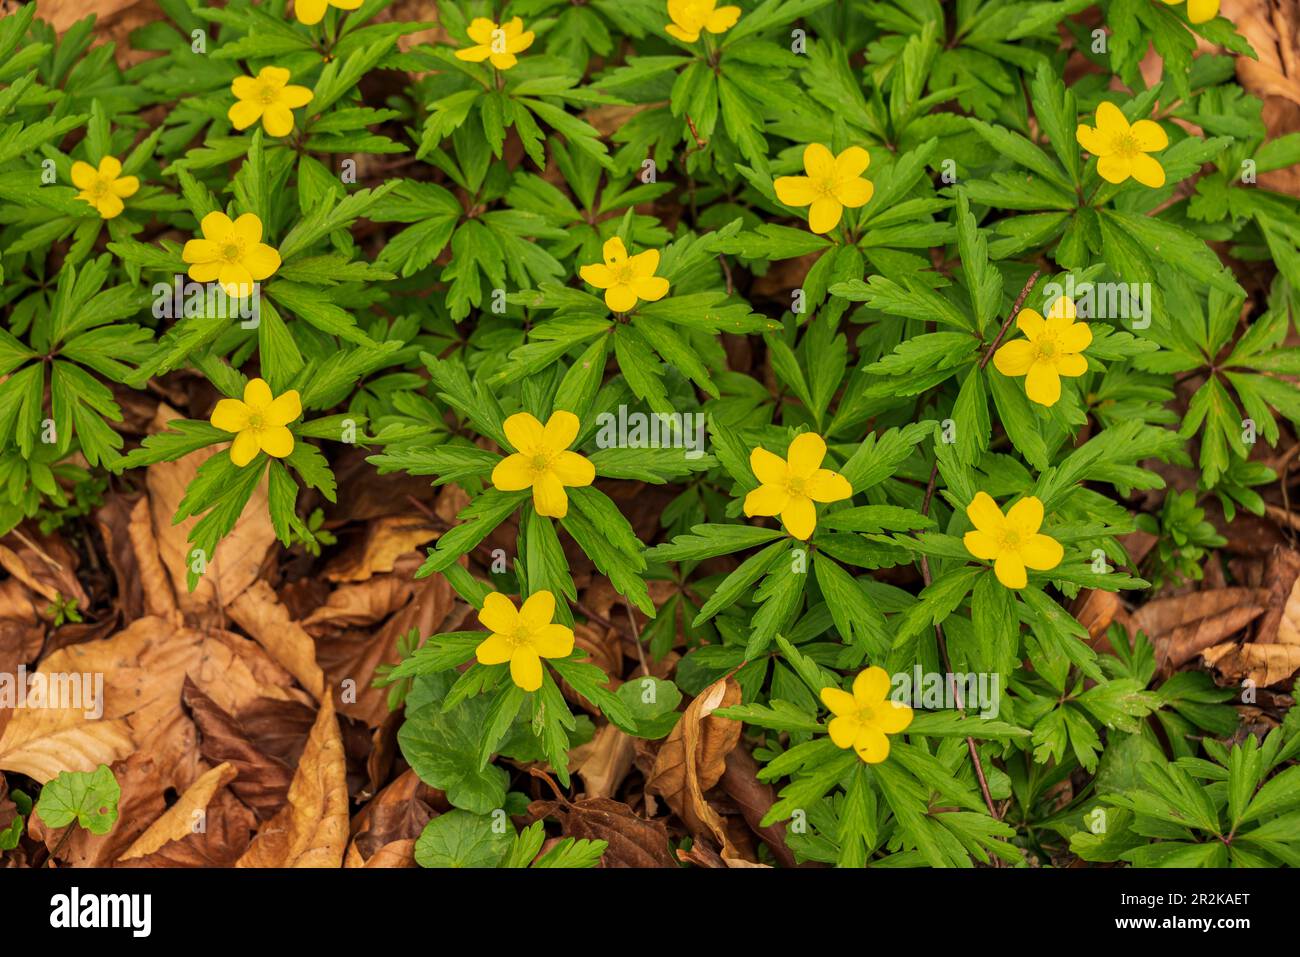 Group of flowering yellow anemones (Anemonoides ranunculoides) in a springtime forest. Suitable as a natural spring background. Stock Photo